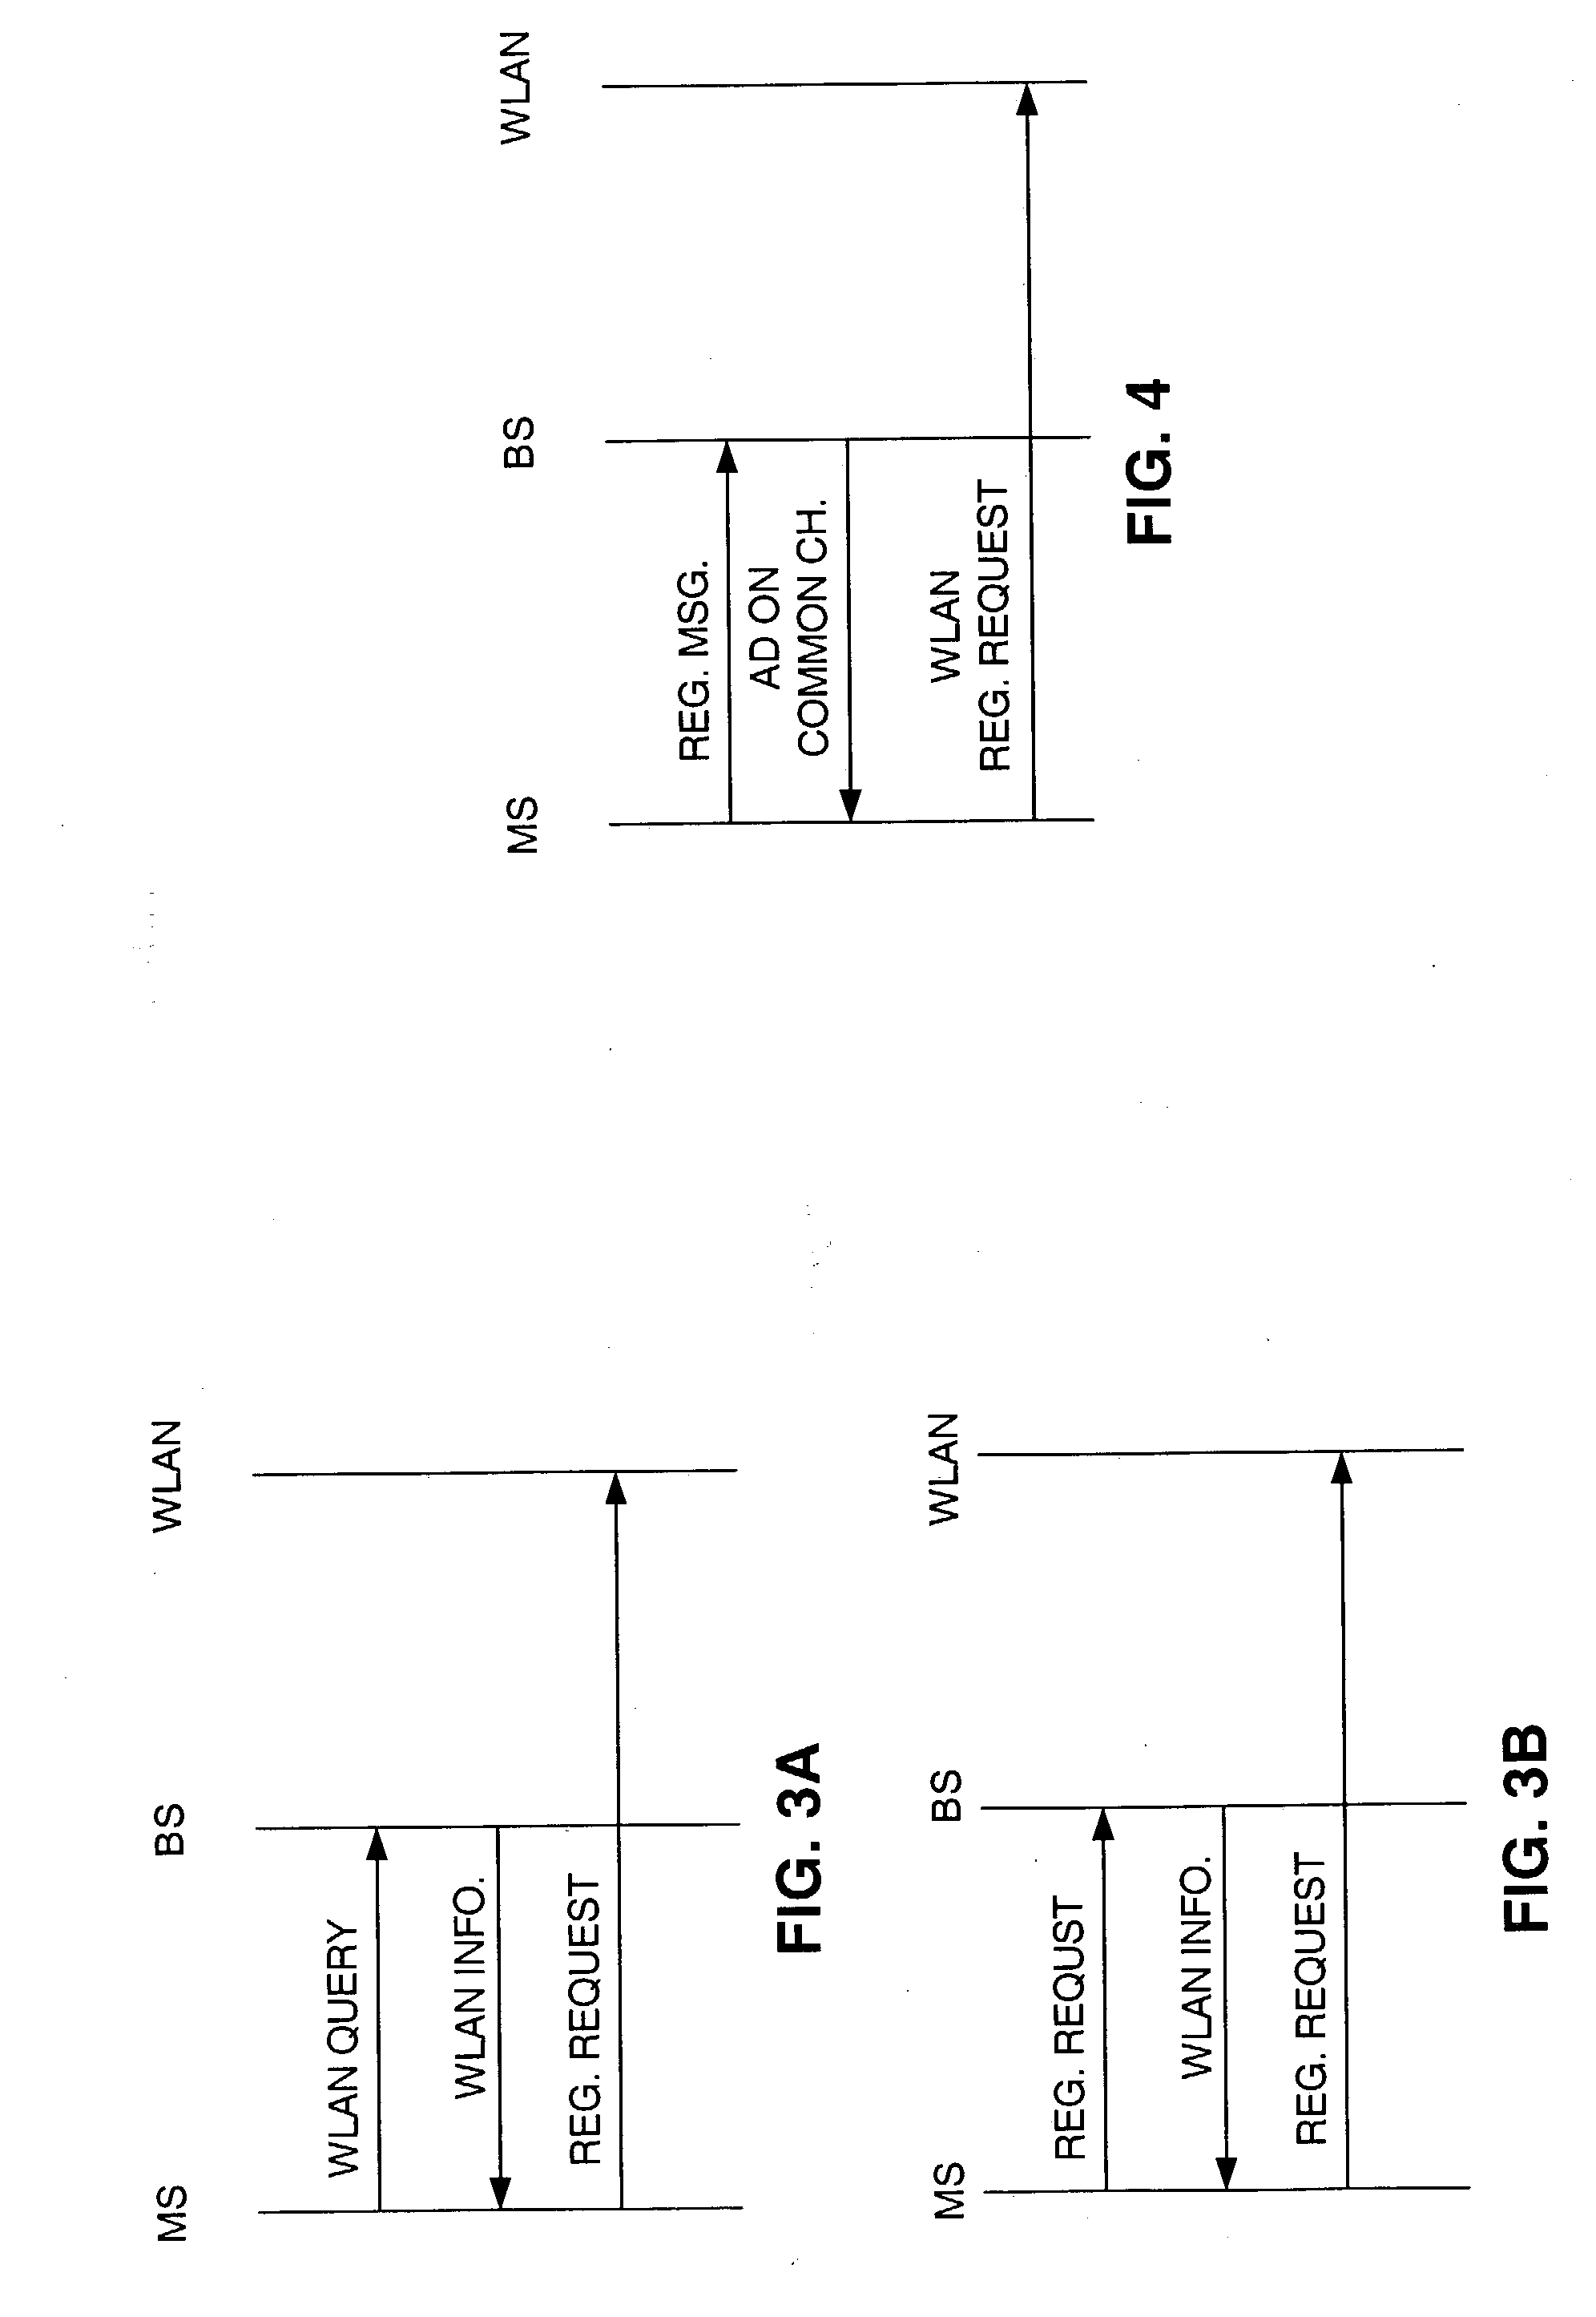 Wireless local access network system detection and selection